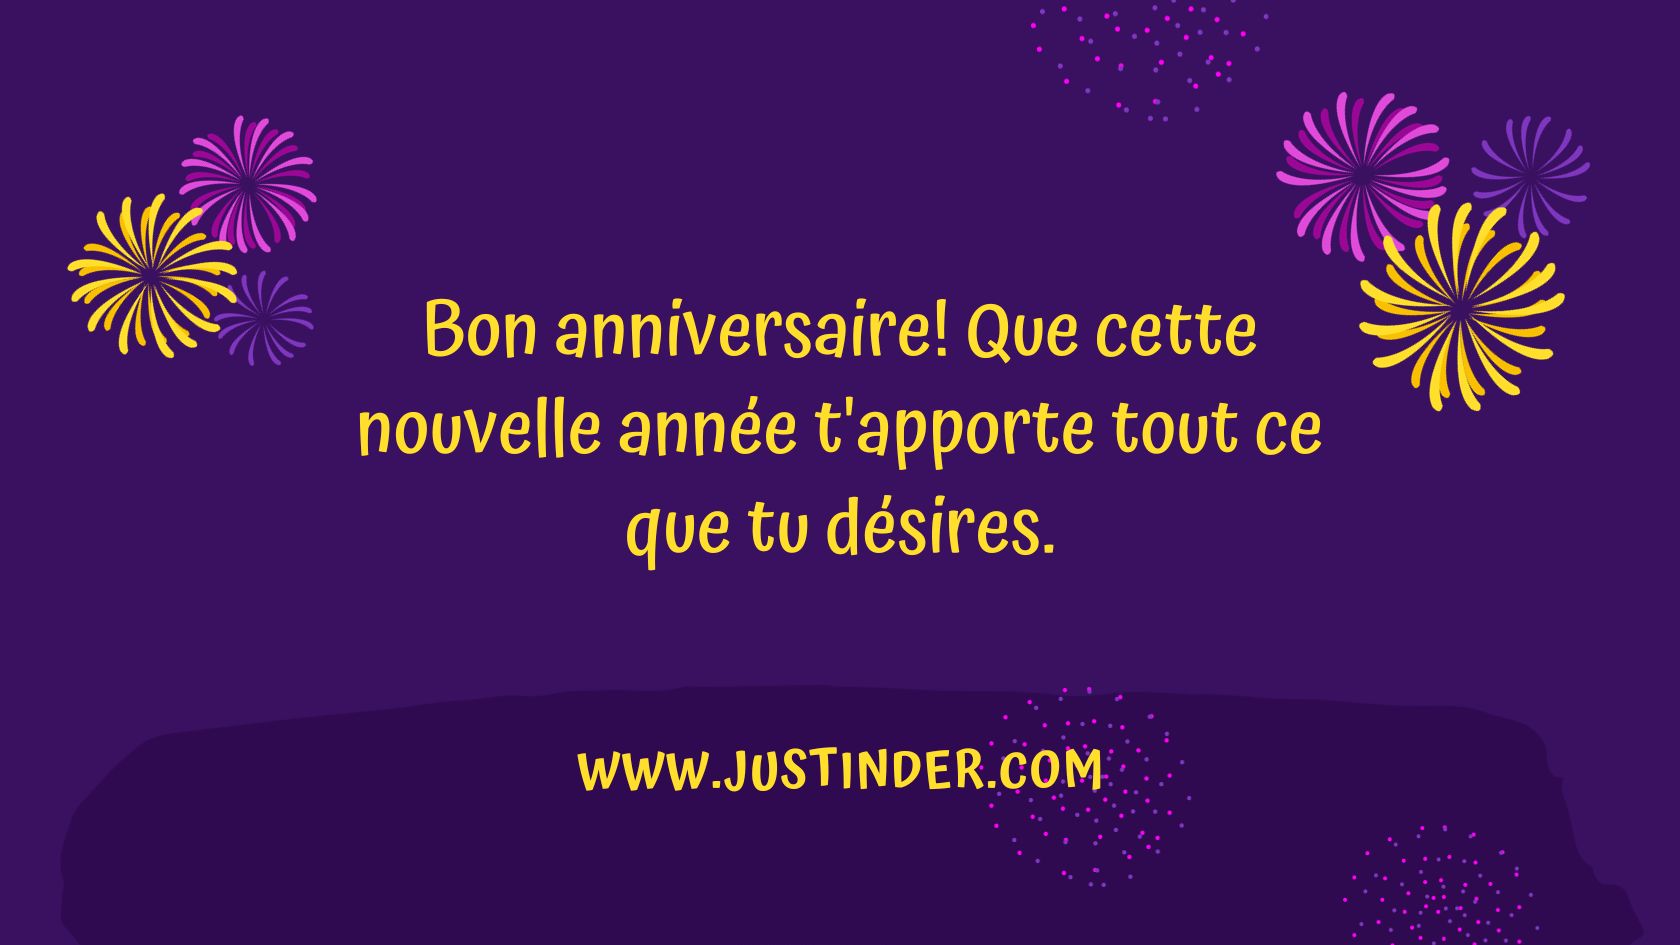 Here are 30 birthday wishes in French: